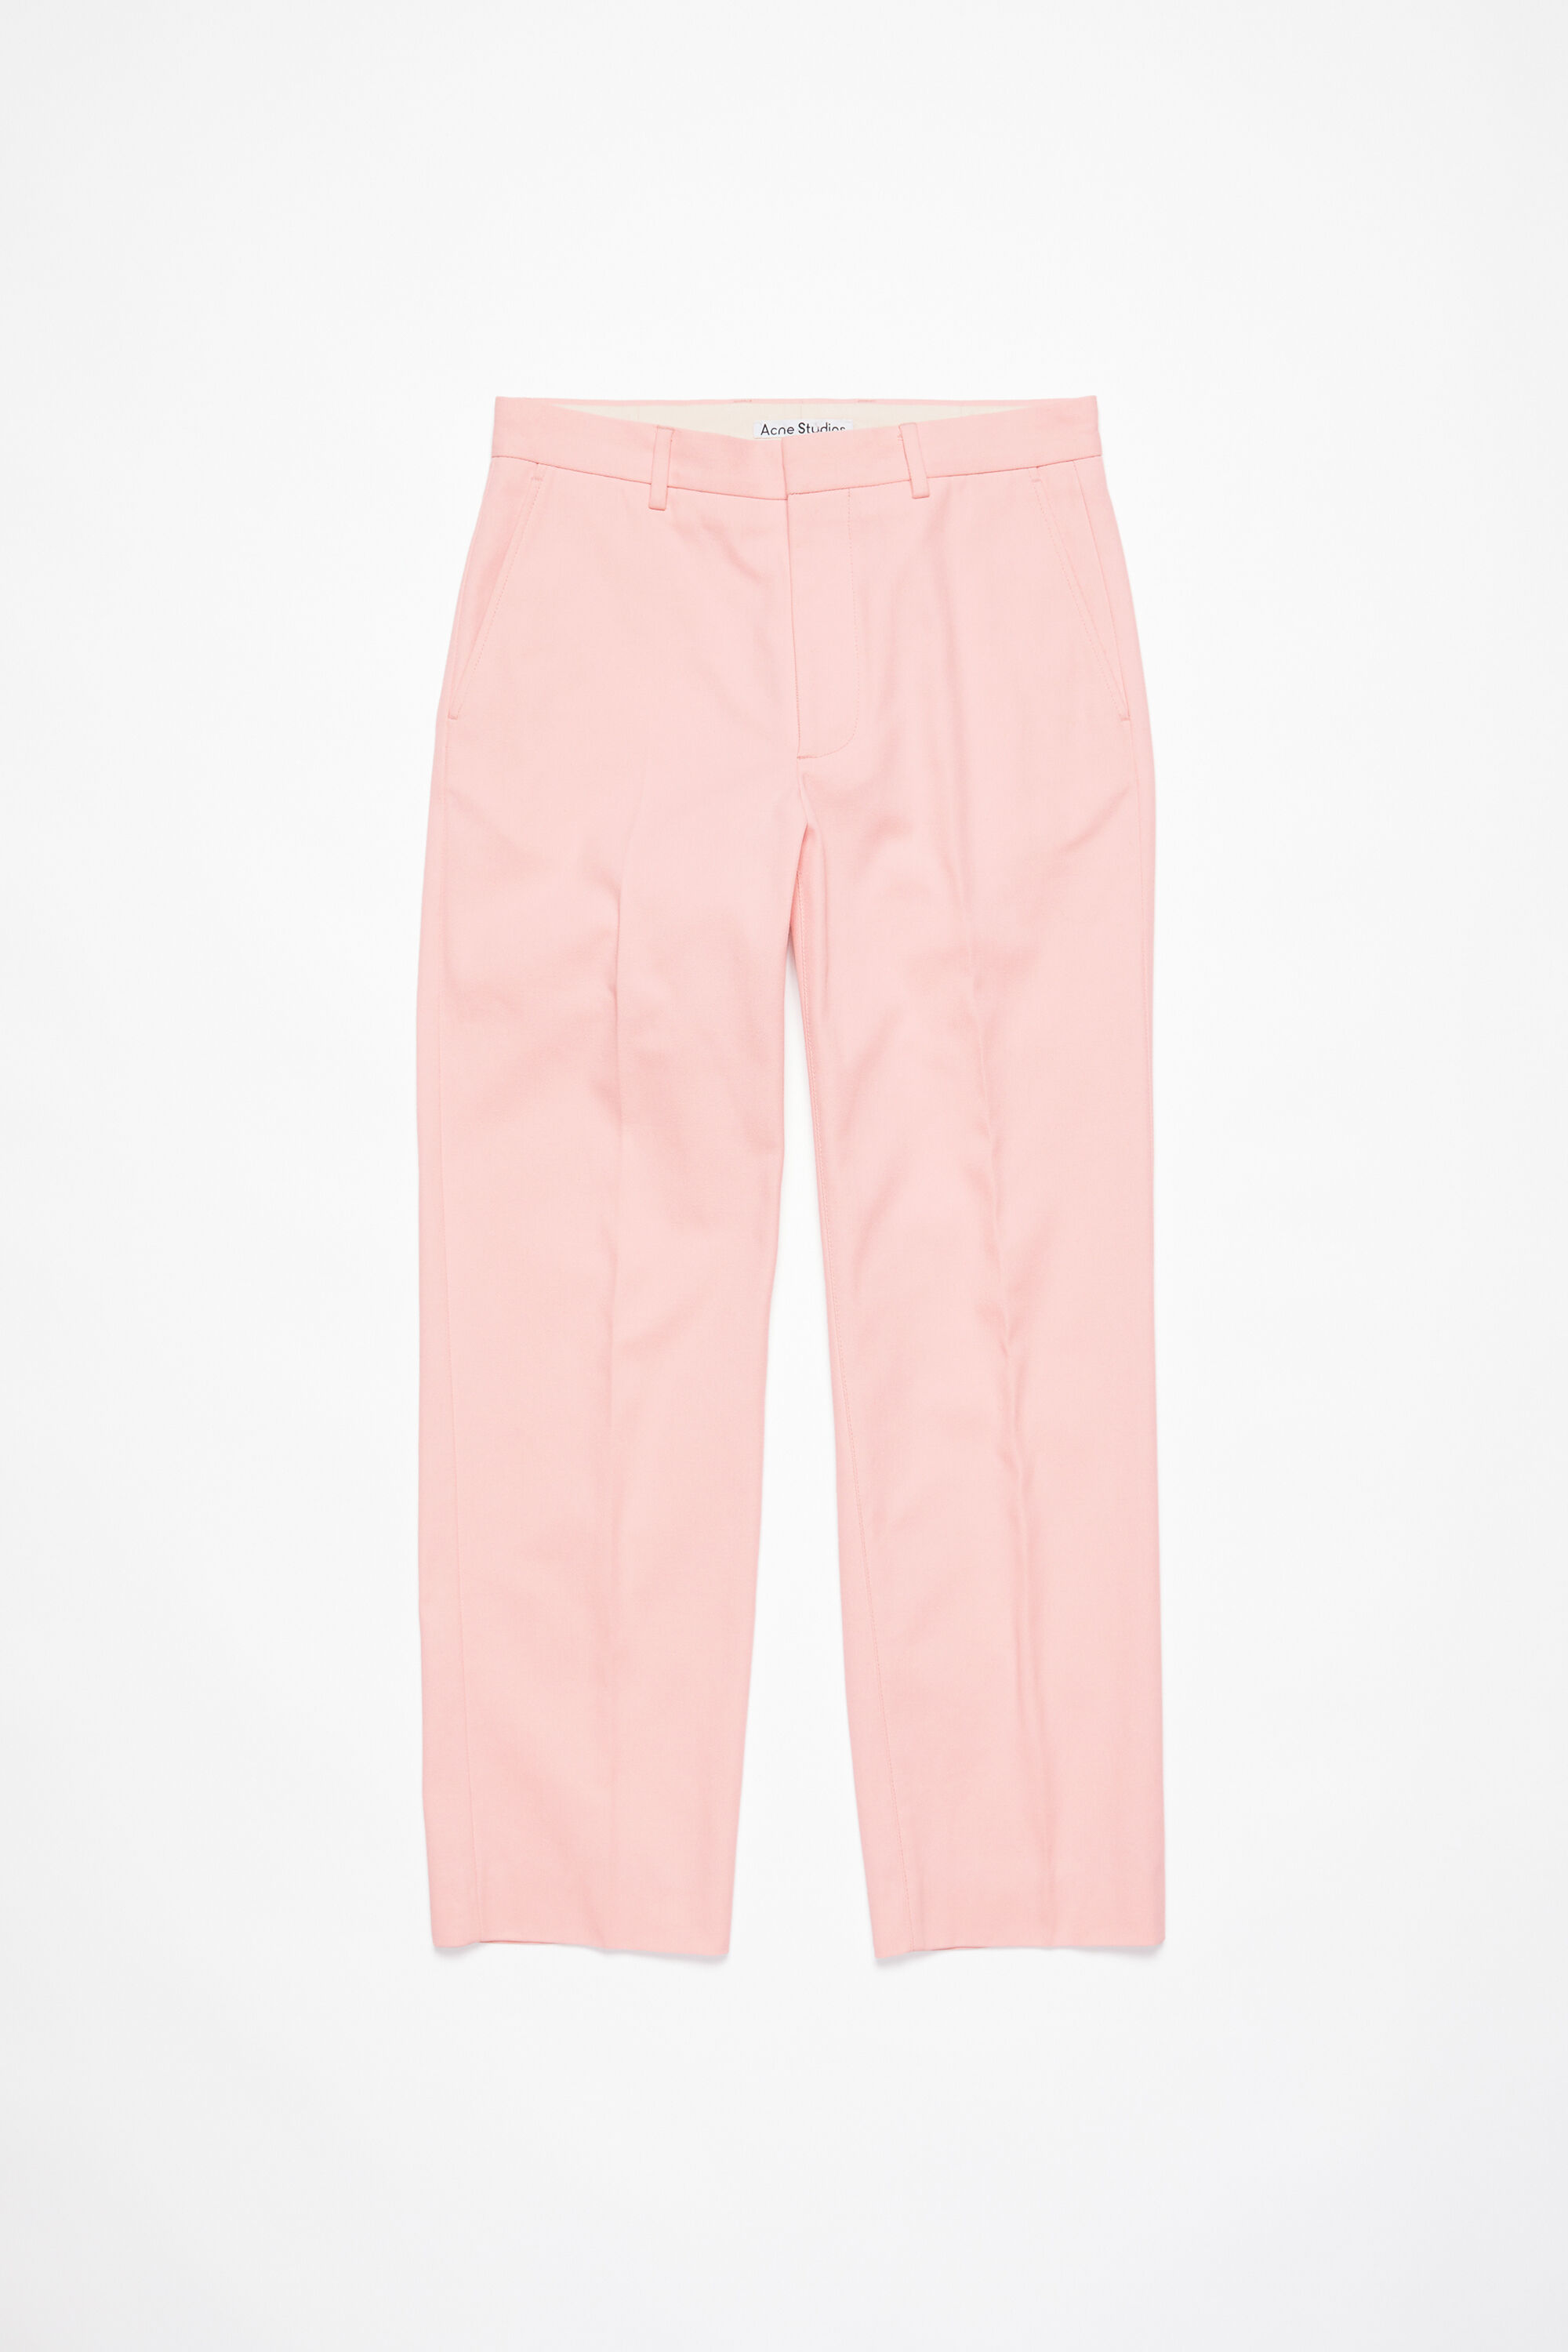 Zara Fluid High Waist Trousers in Pale Pink — UFO No More